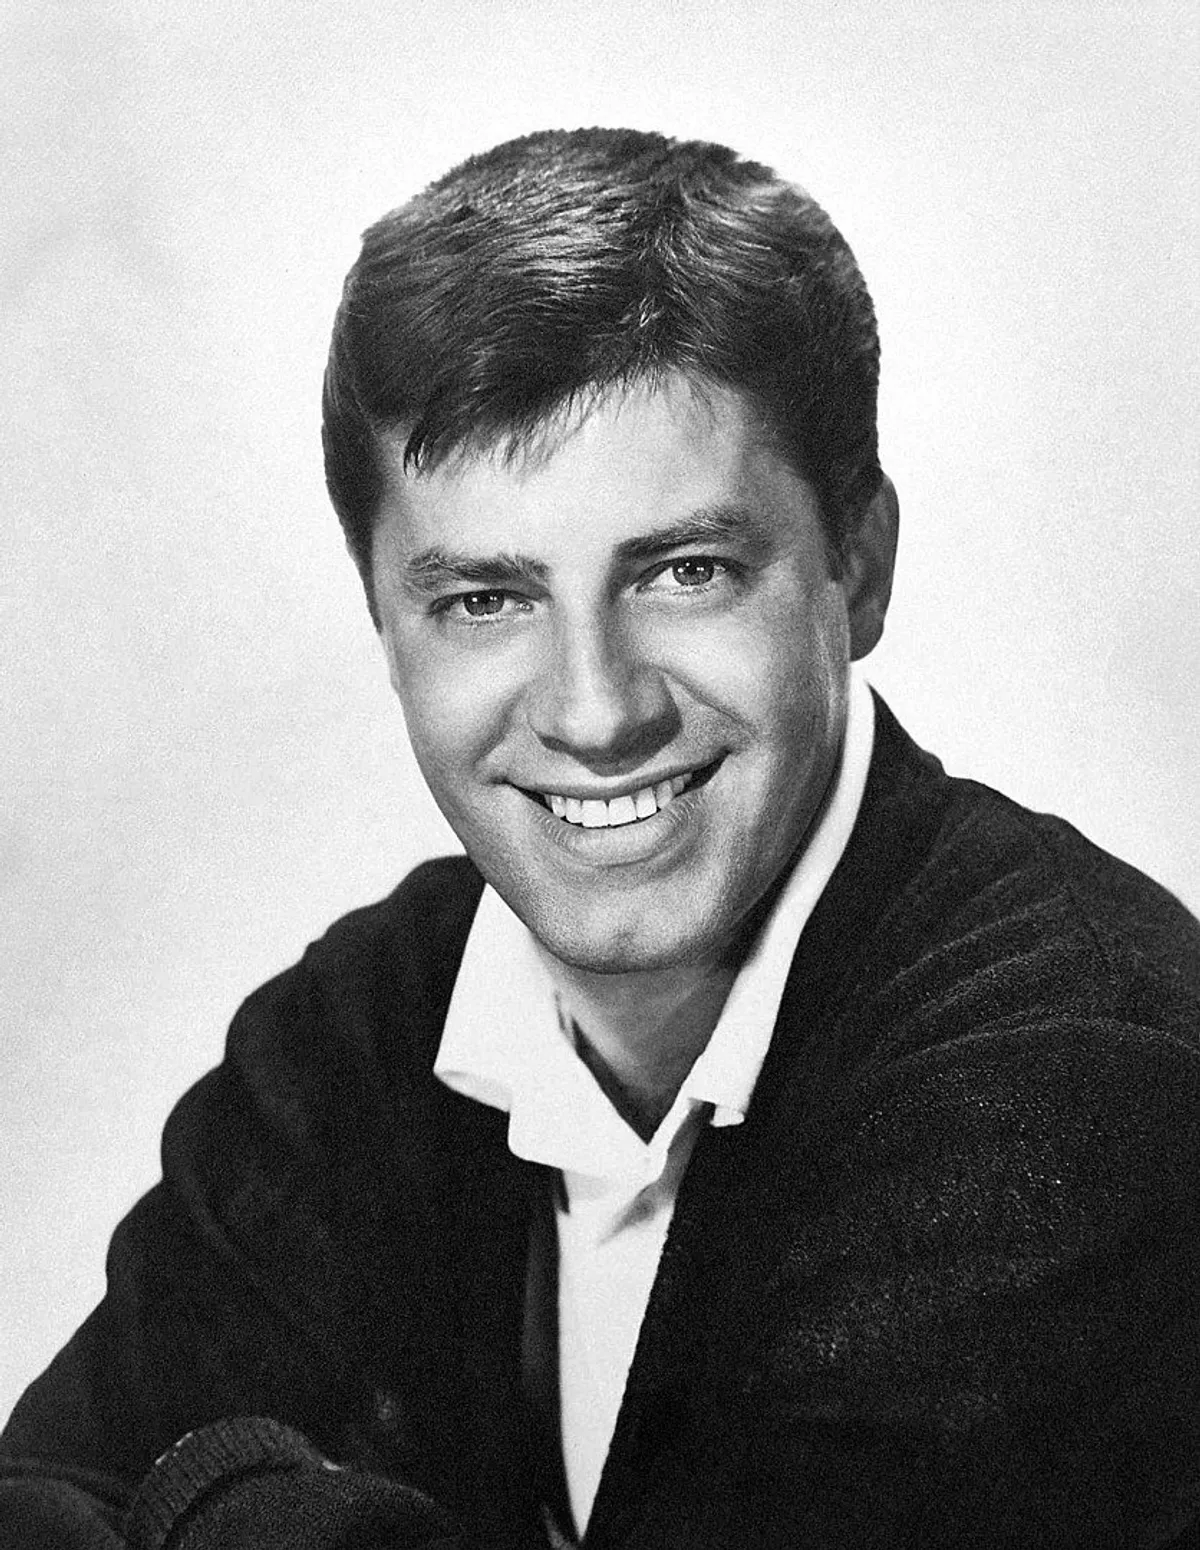 Portrait of Jerry Lewis circa 1957 | Photo: Wikimedia Commons Images